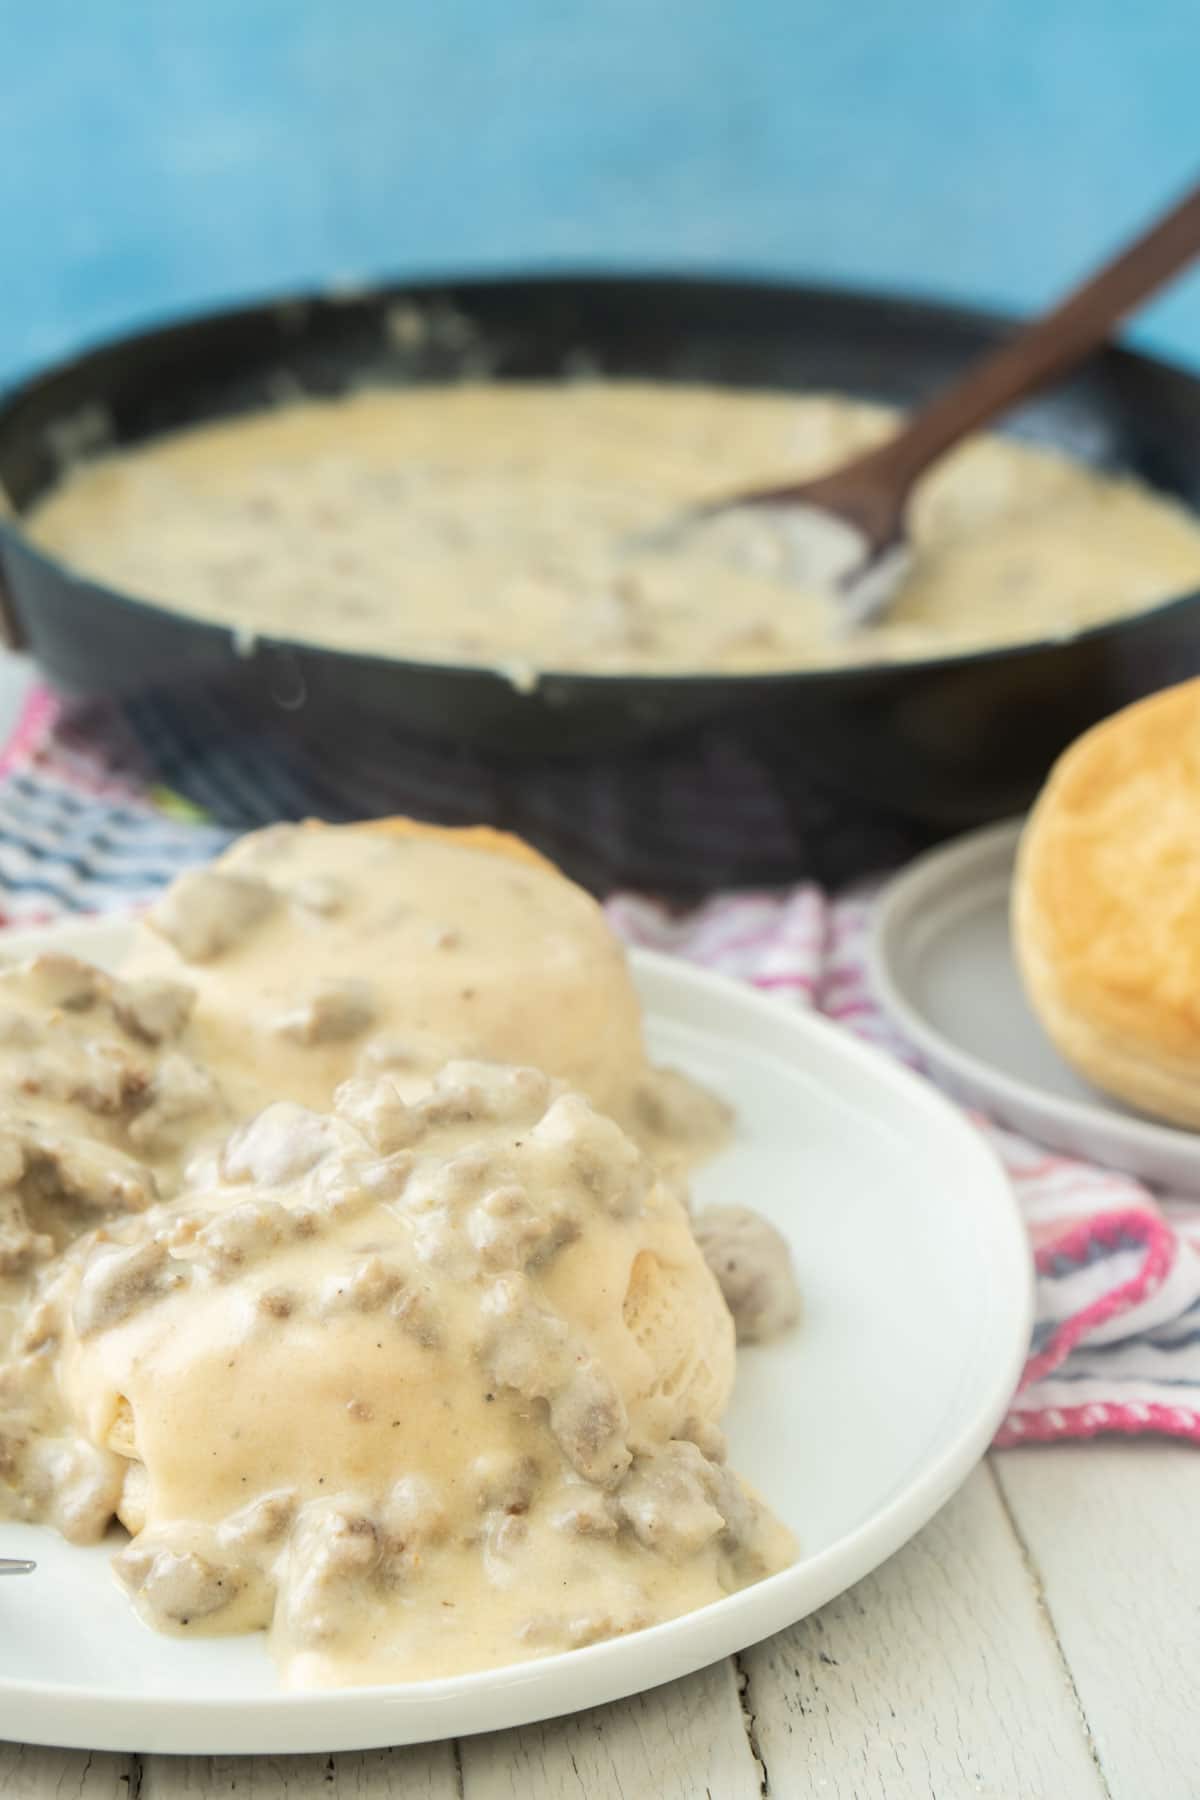 Biscuits and homemade sausage gravy on a white plate